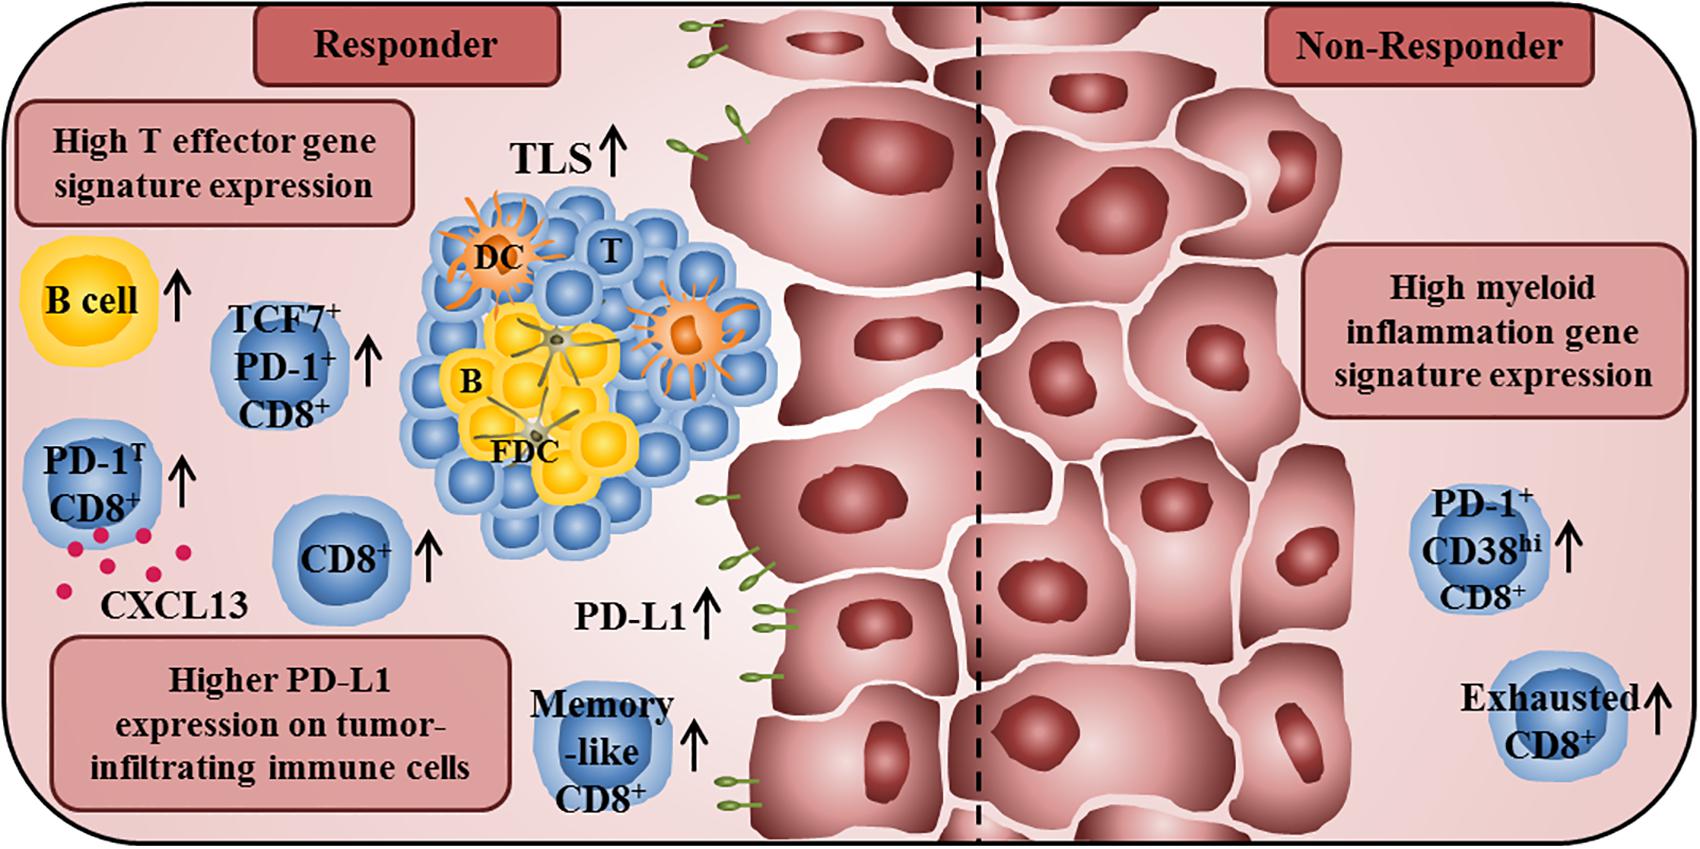 Frontiers Characteristics Of Tumor Infiltrating Lymphocytes Prior To And During Immune Checkpoint Inhibitor Therapy Immunology